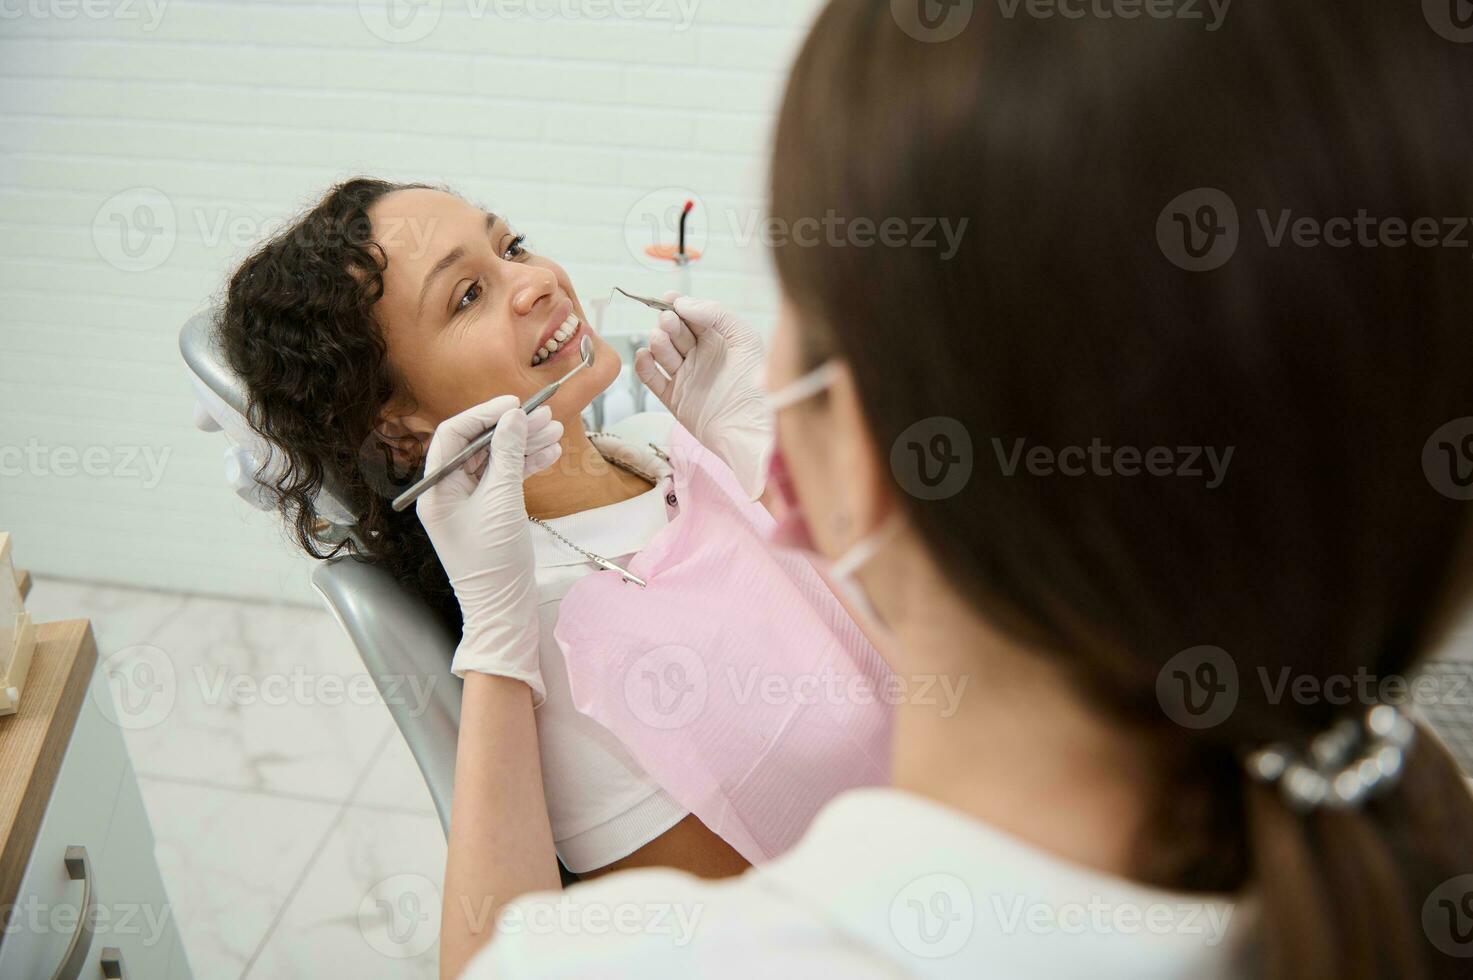 View through blurred dentist hygienist holding stainless steel dental tools- probe, mirror and examining the oral cavity of a dentistry clinic patient with perfect white teeth sitting in dentist chair photo